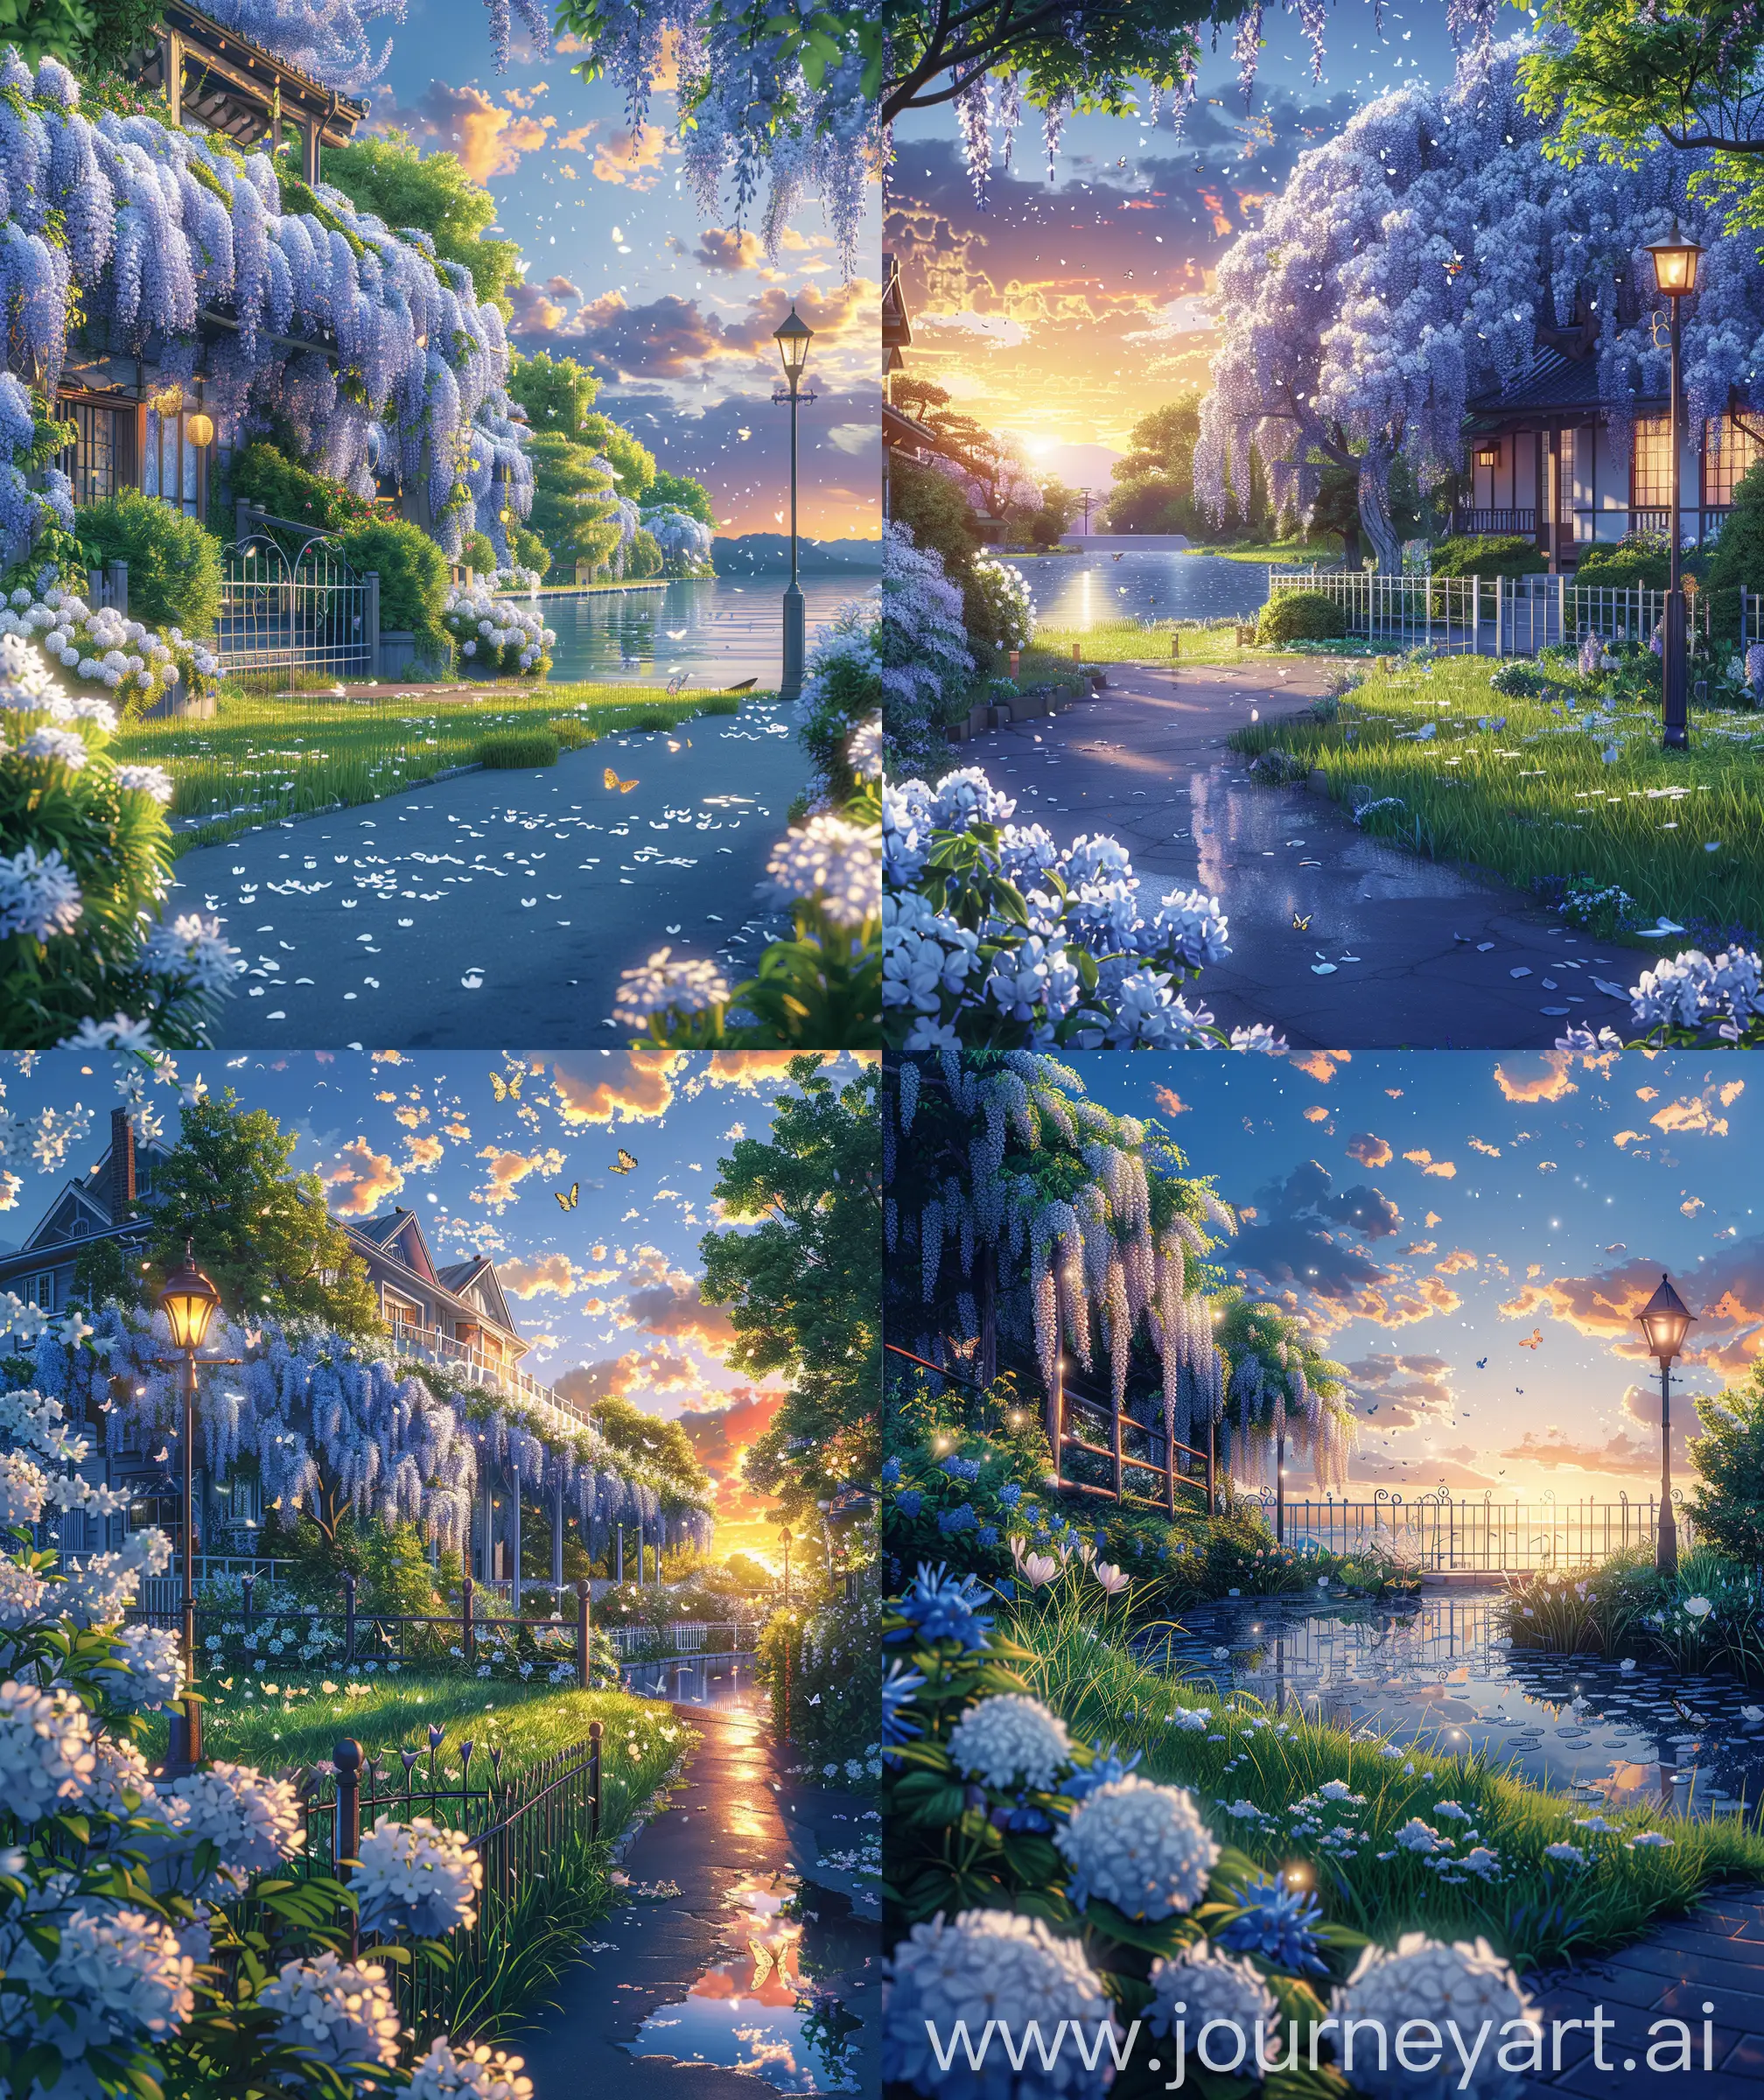 Beautiful anime scenary, mokoto shinkai and Ghibli style mix, direct front facade view of lily pier , wistera garden, pond,, grass, pavement road, white and blue flowers flowers, fence, bushes, lamp post, sunrise view , small butterflies" close up, vibrant and quite look, ultra hd, High quality, sharp details, no hyperrealistic --ar 27:32 --s 400